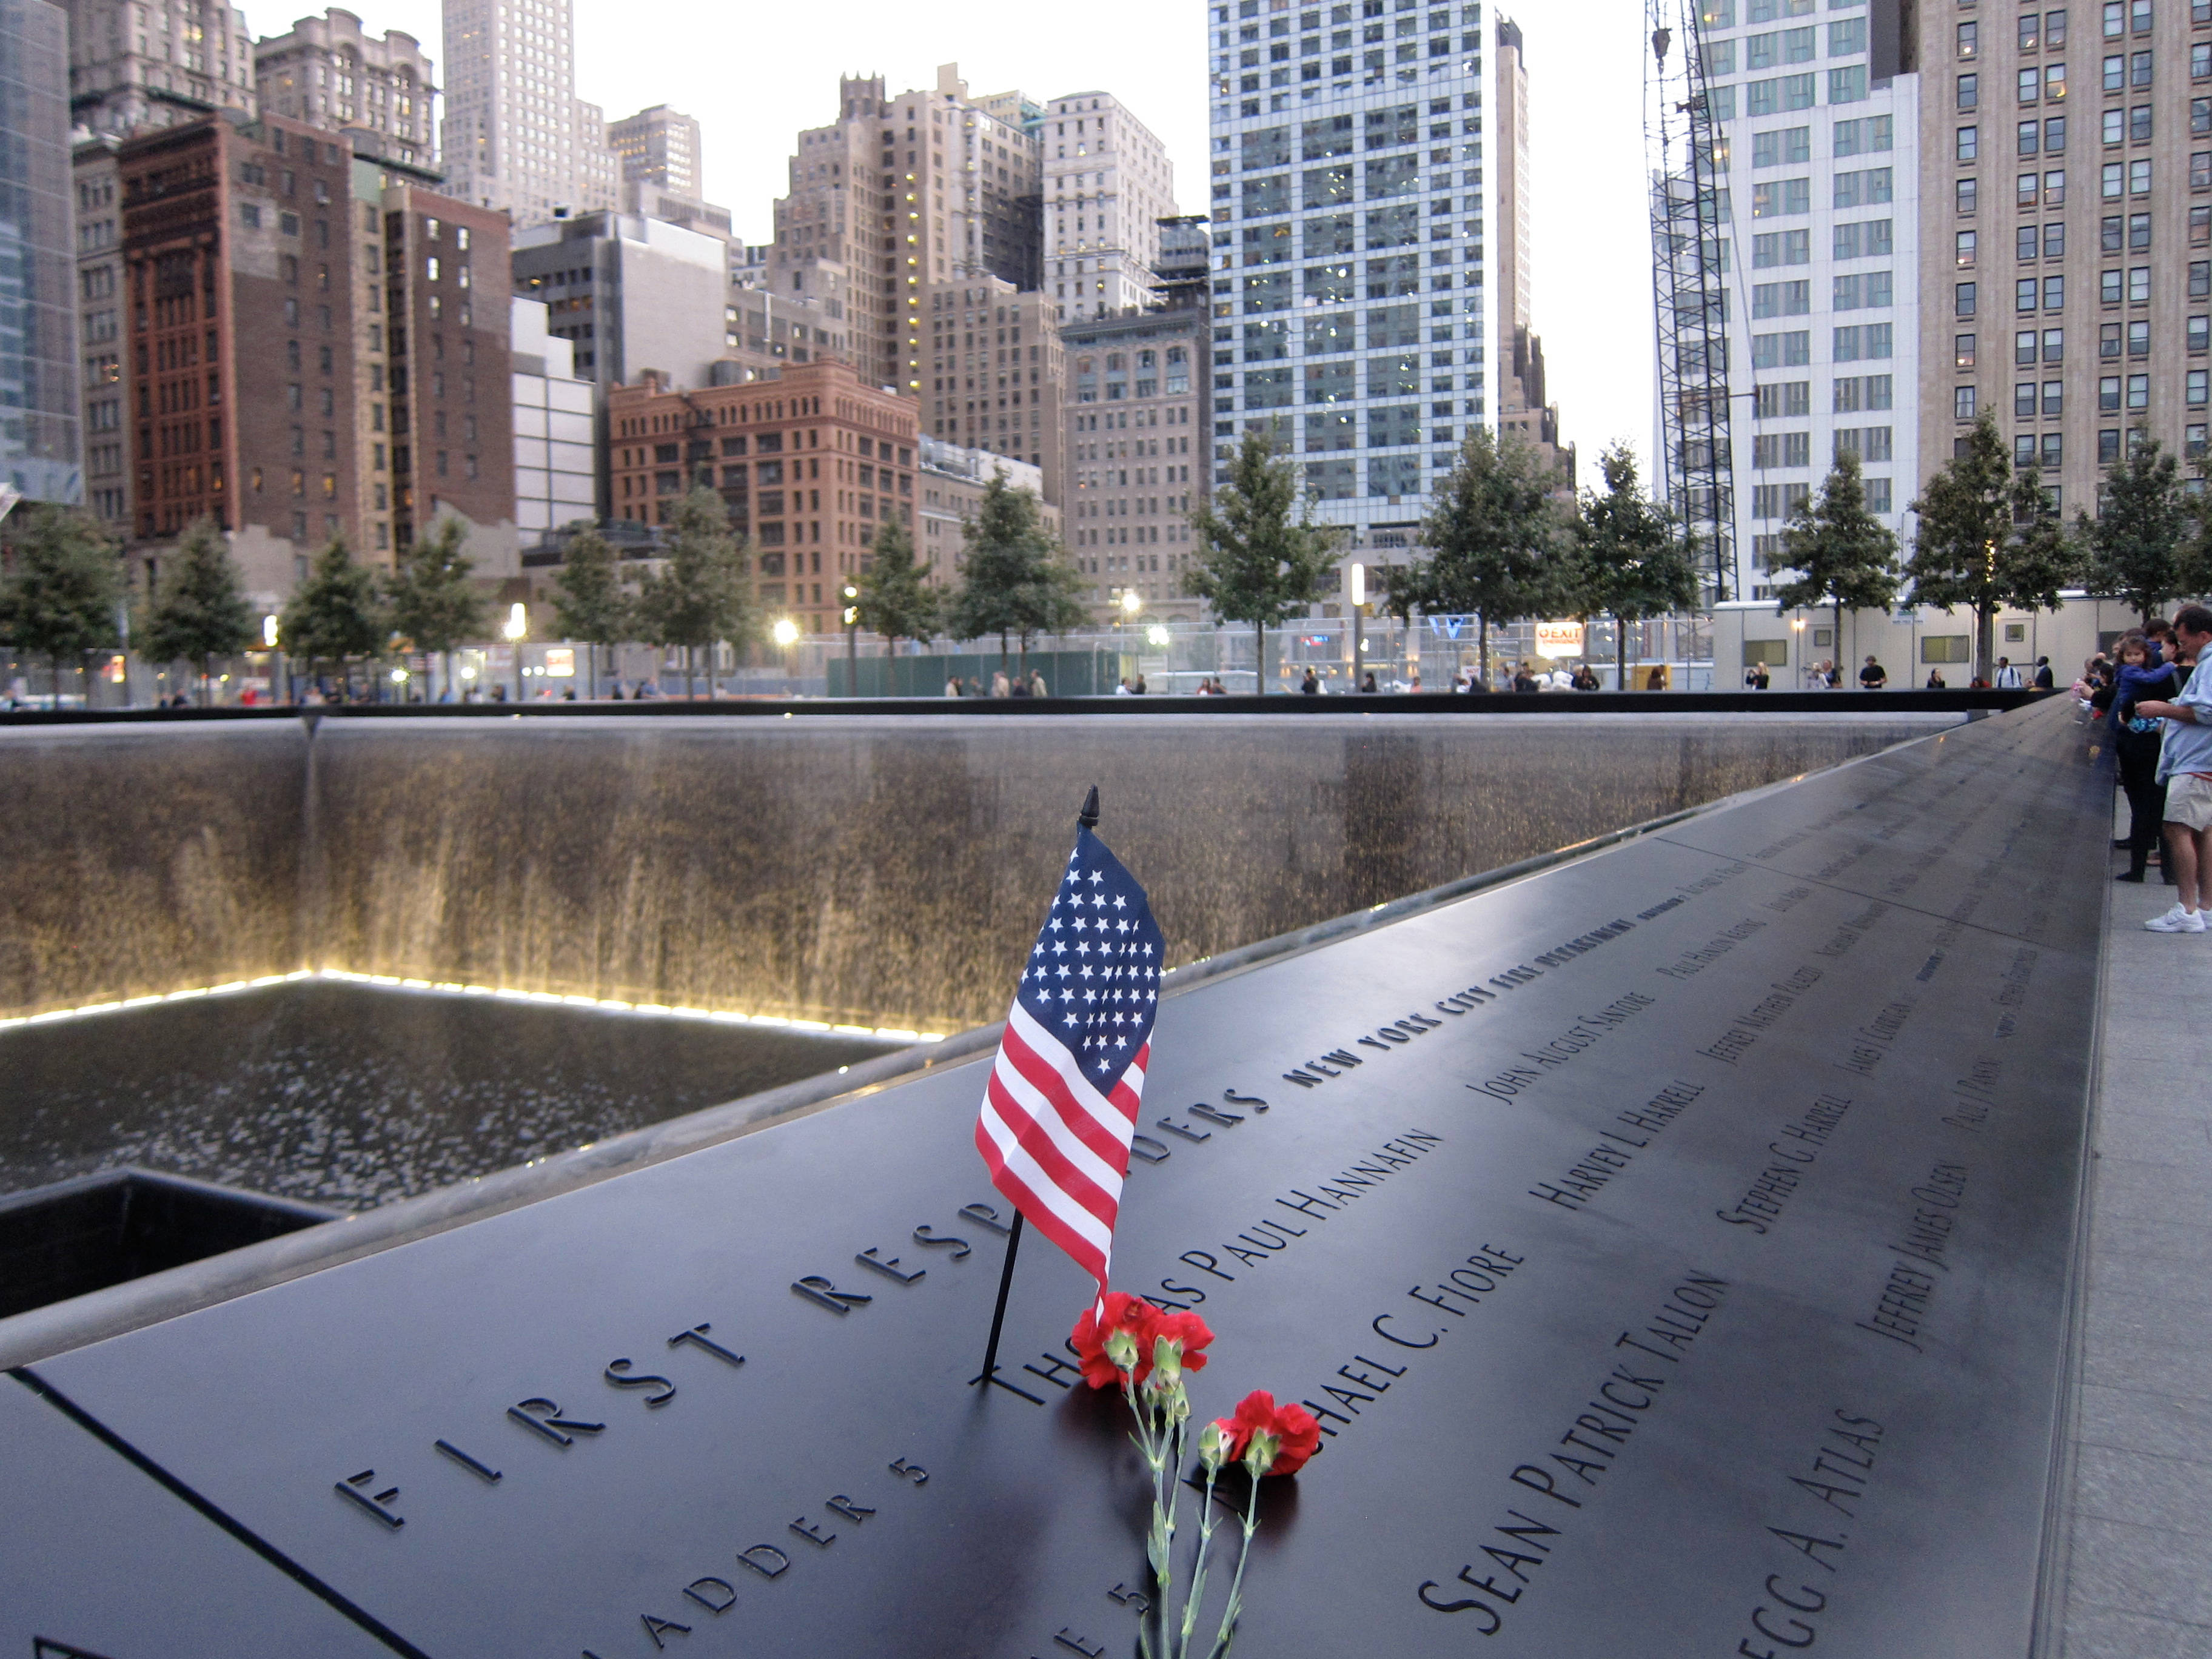 "A poignant tribute at the 911 Memorial - American flag and flowers" Wallpaper